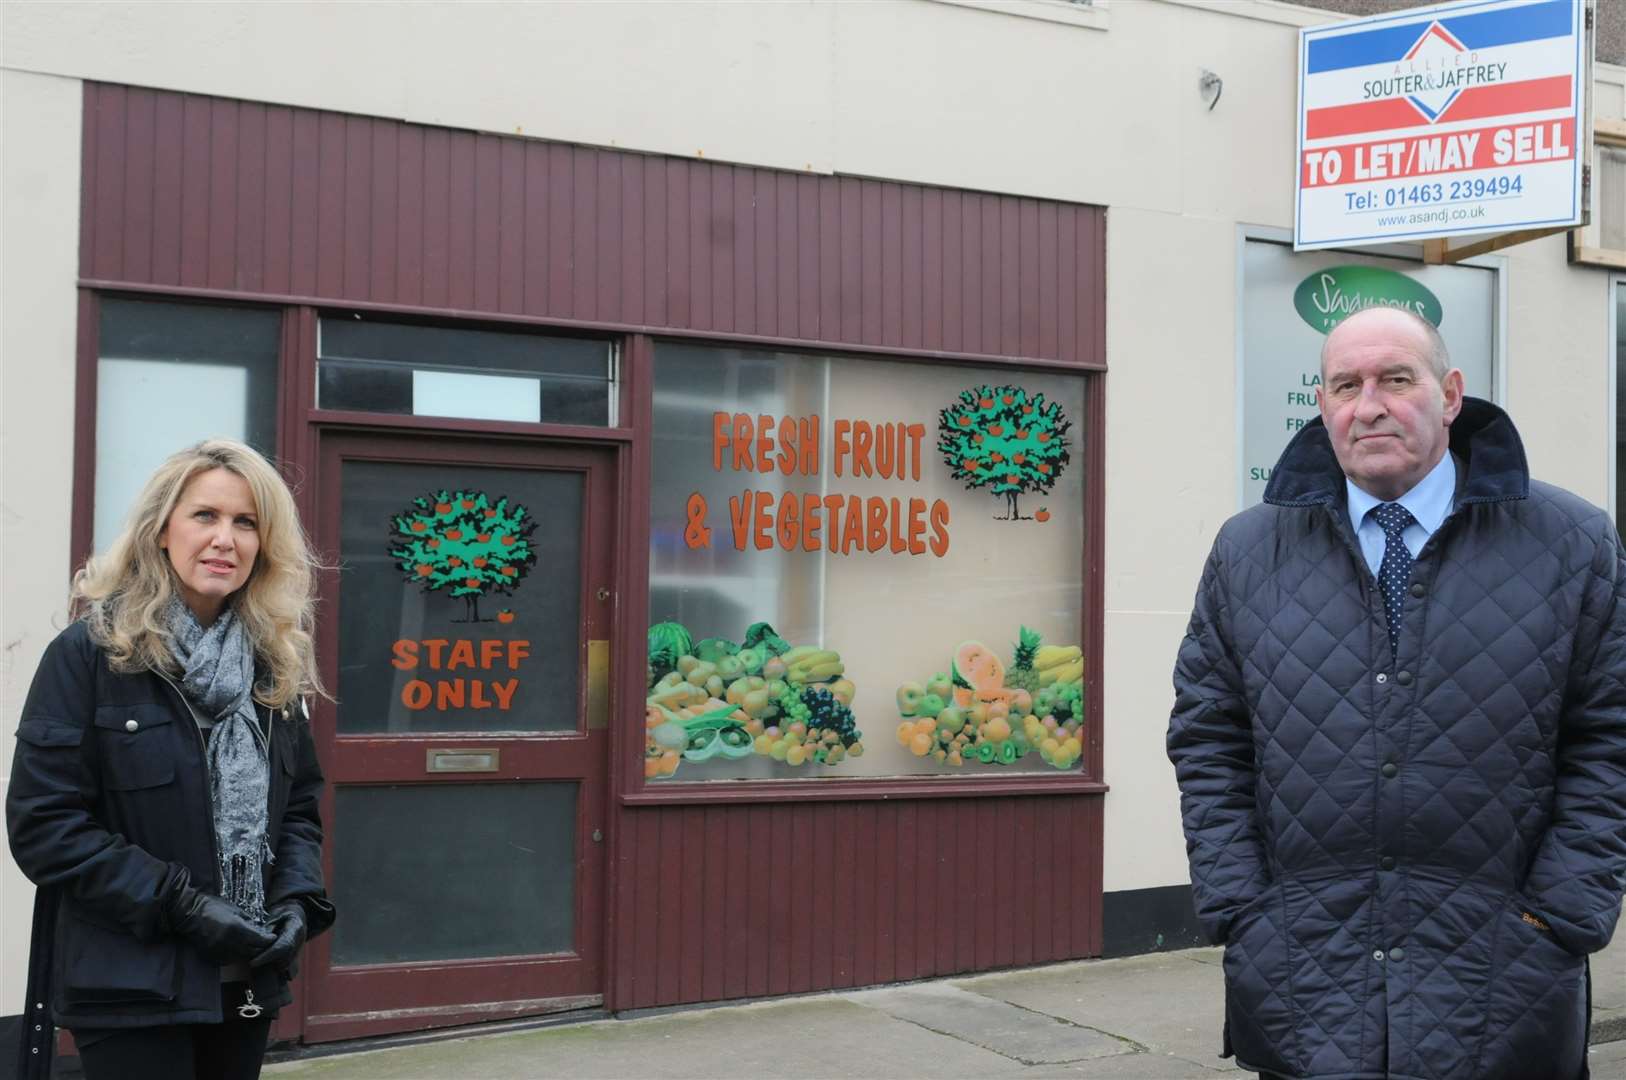 Mike Mulholland, pictured with fellow community councillor Carolle Ralph, was a strong advocate for the town of Lossiemouth.